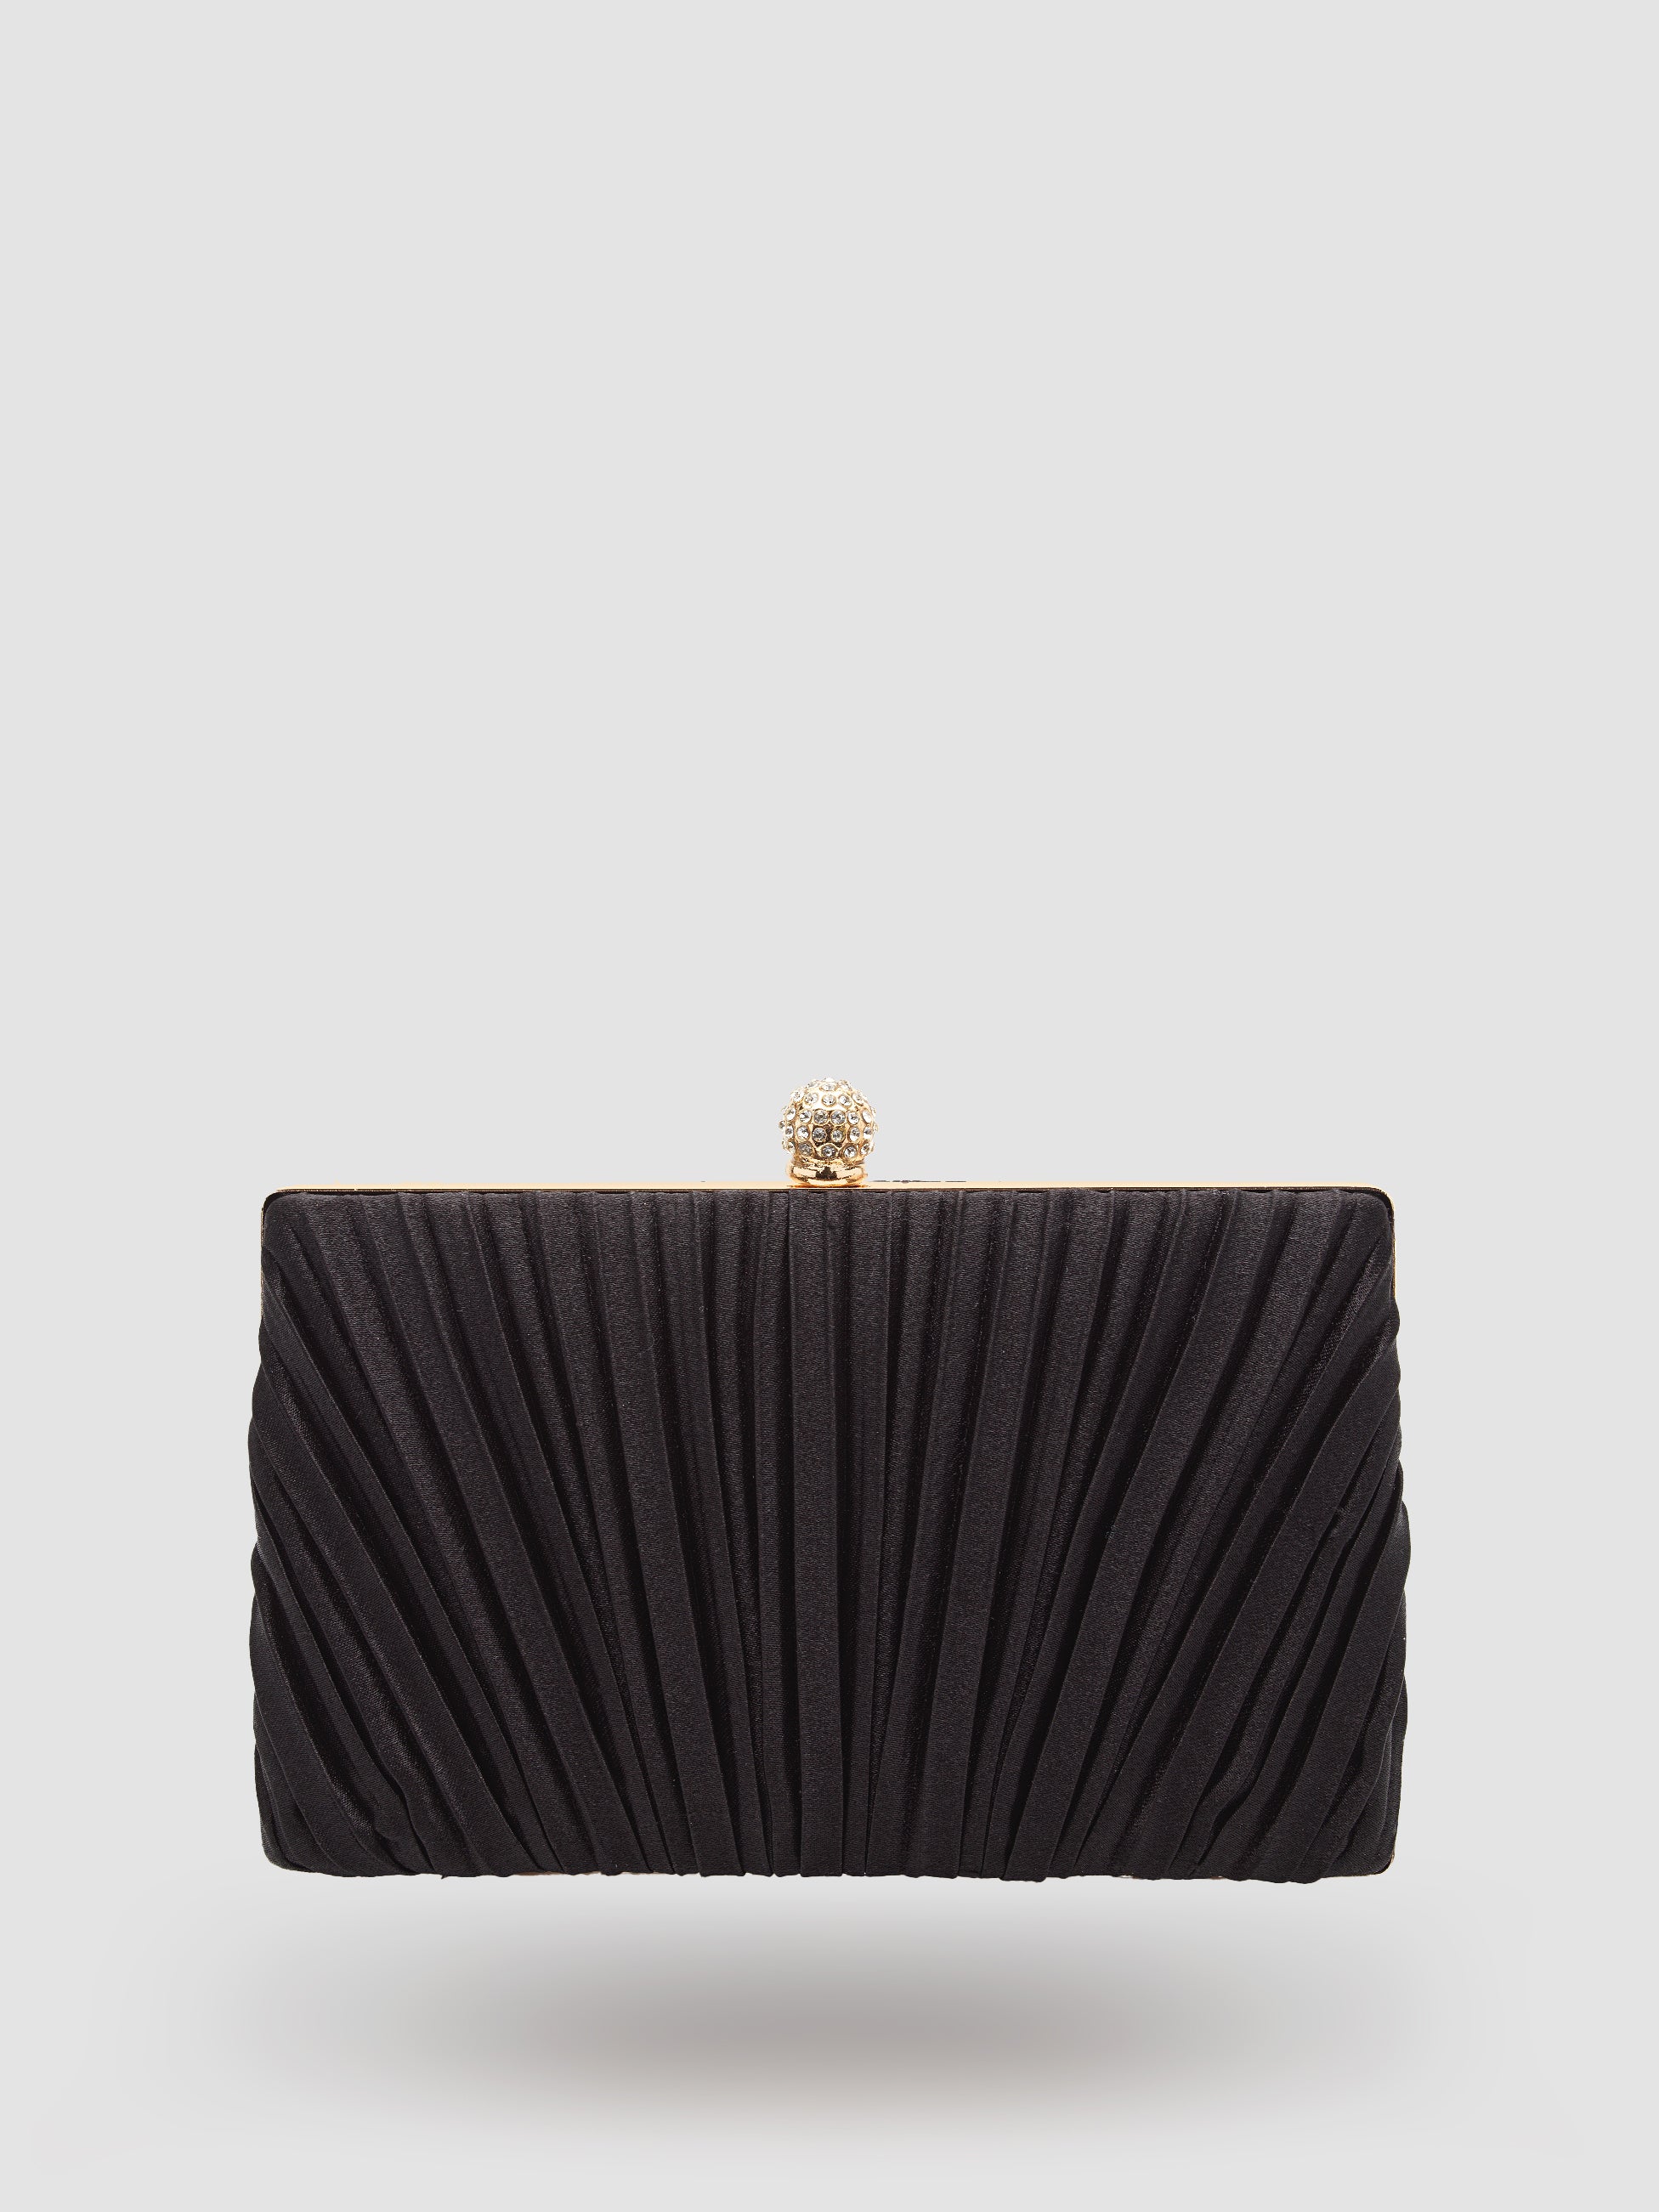 Pleated Satin Minaudiere With Metal Top Closure